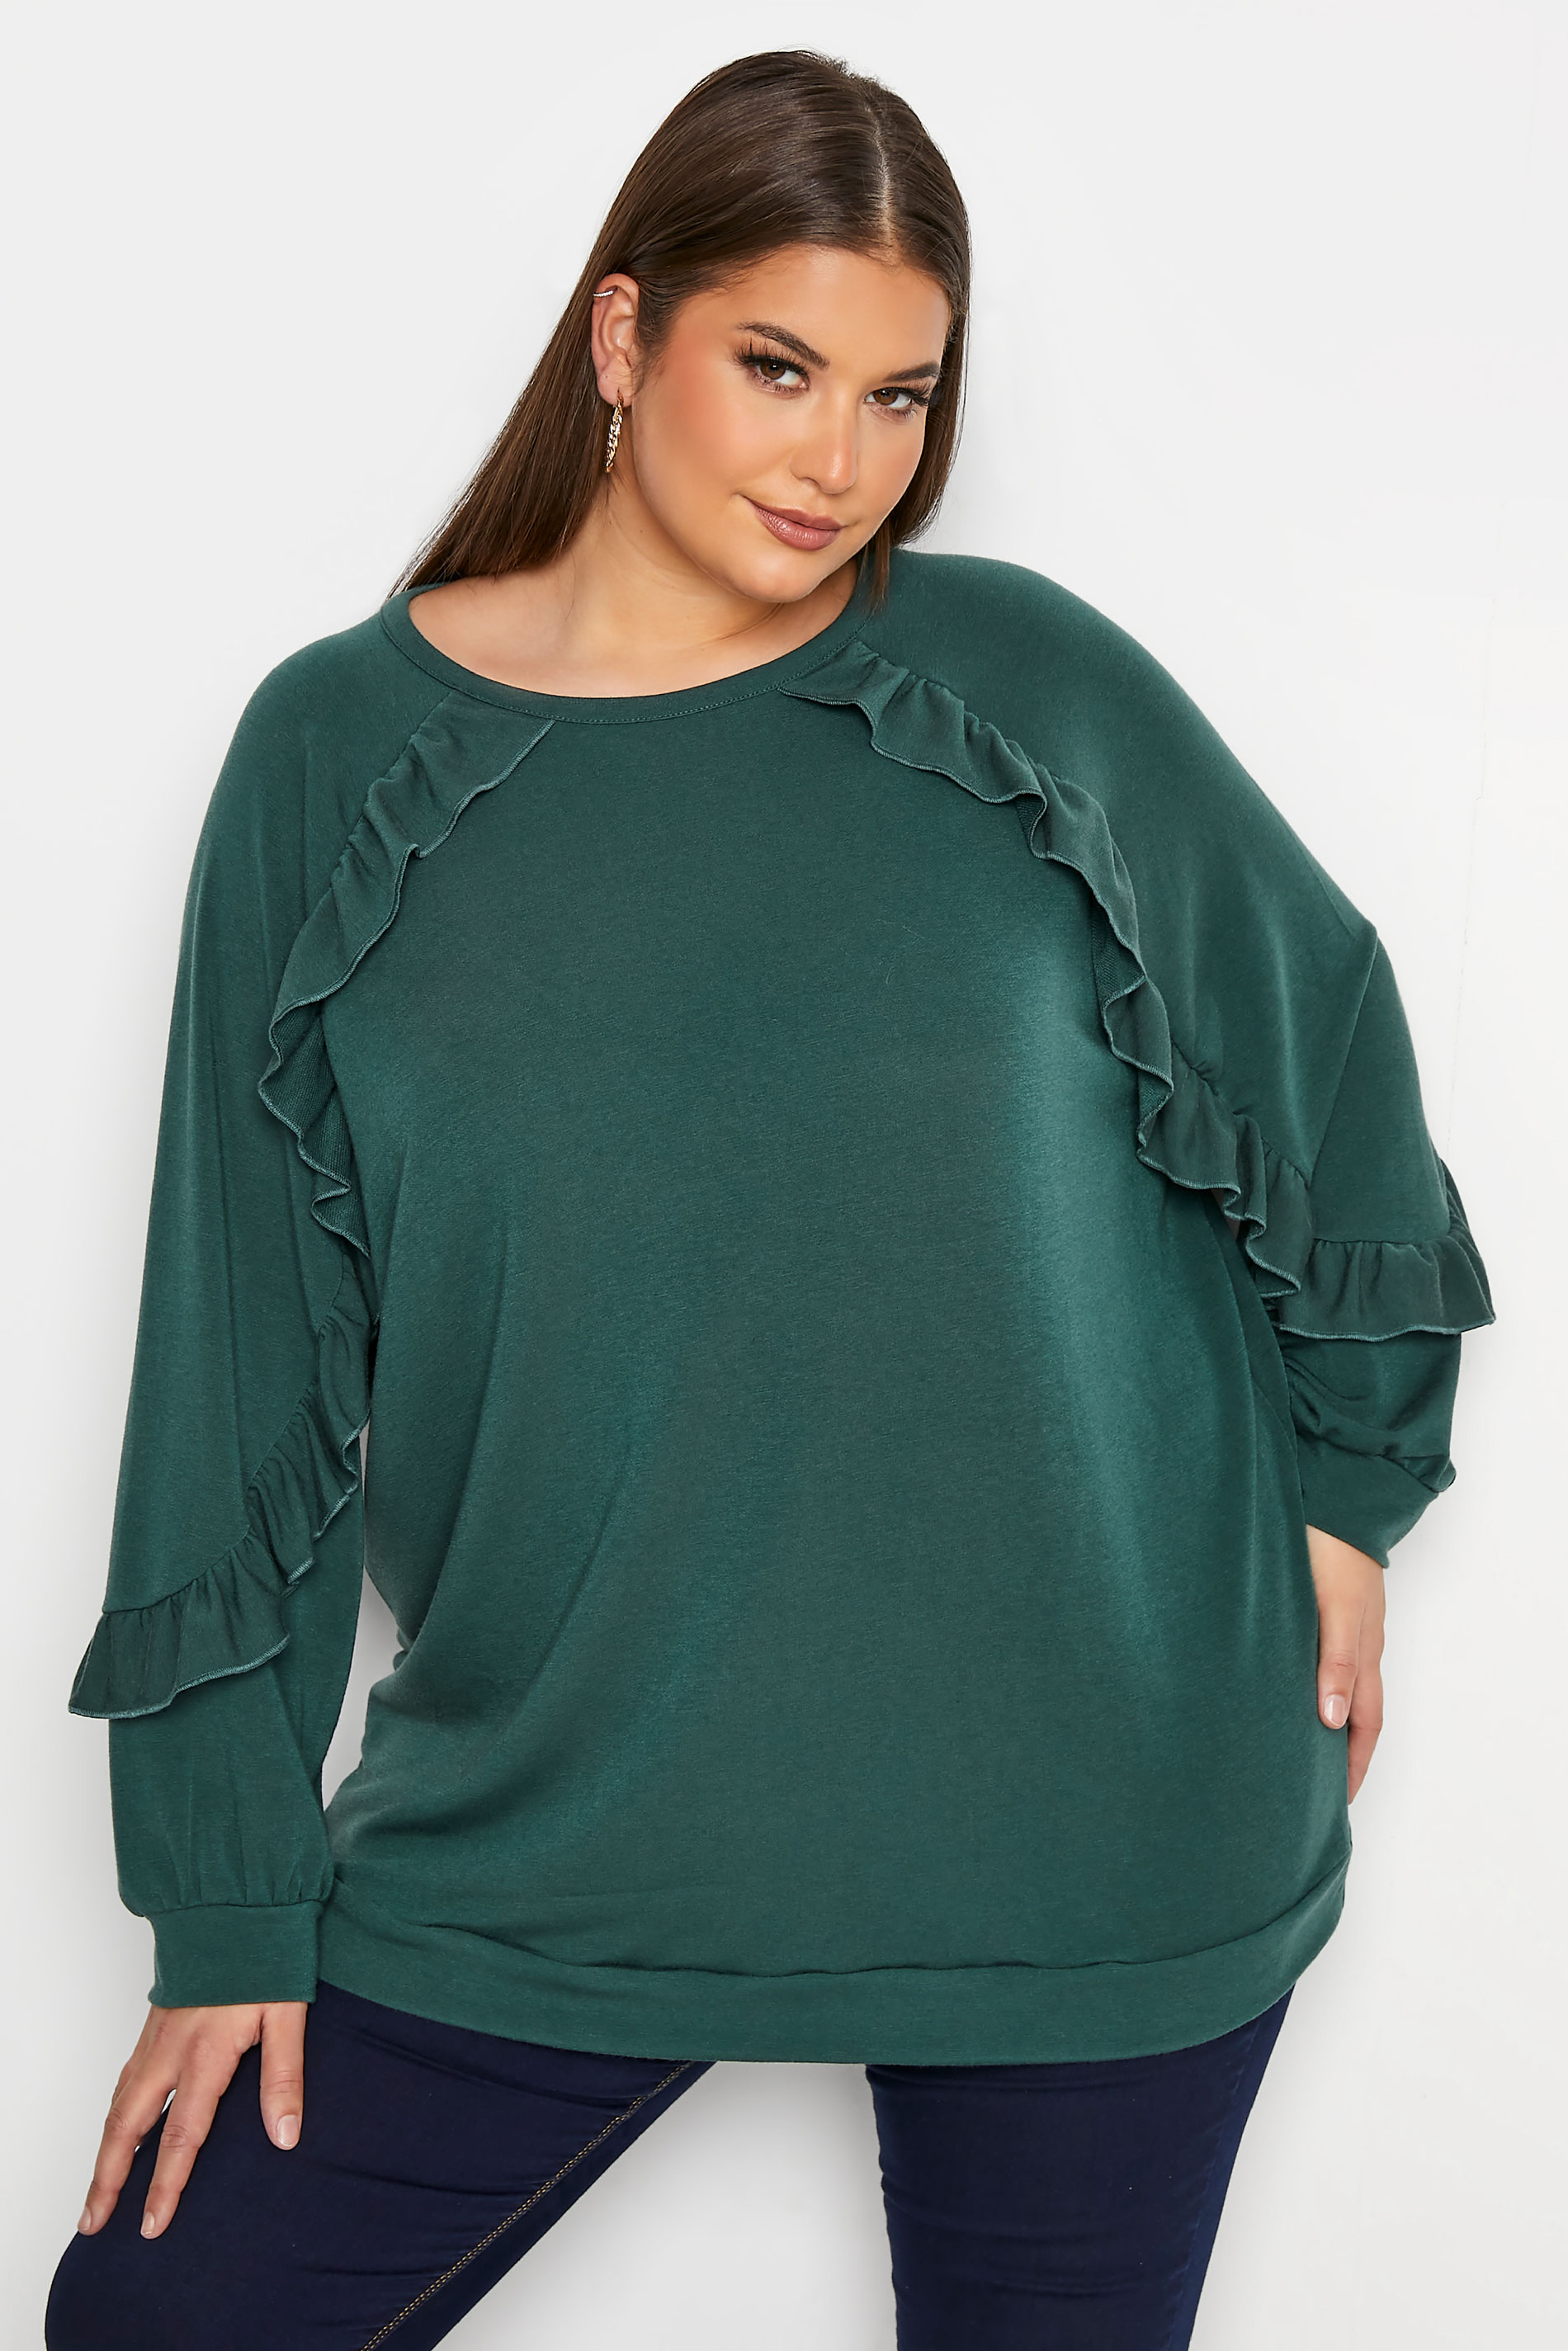 LIMITED COLLECTION Curve Green Frill Sleeve Top 1